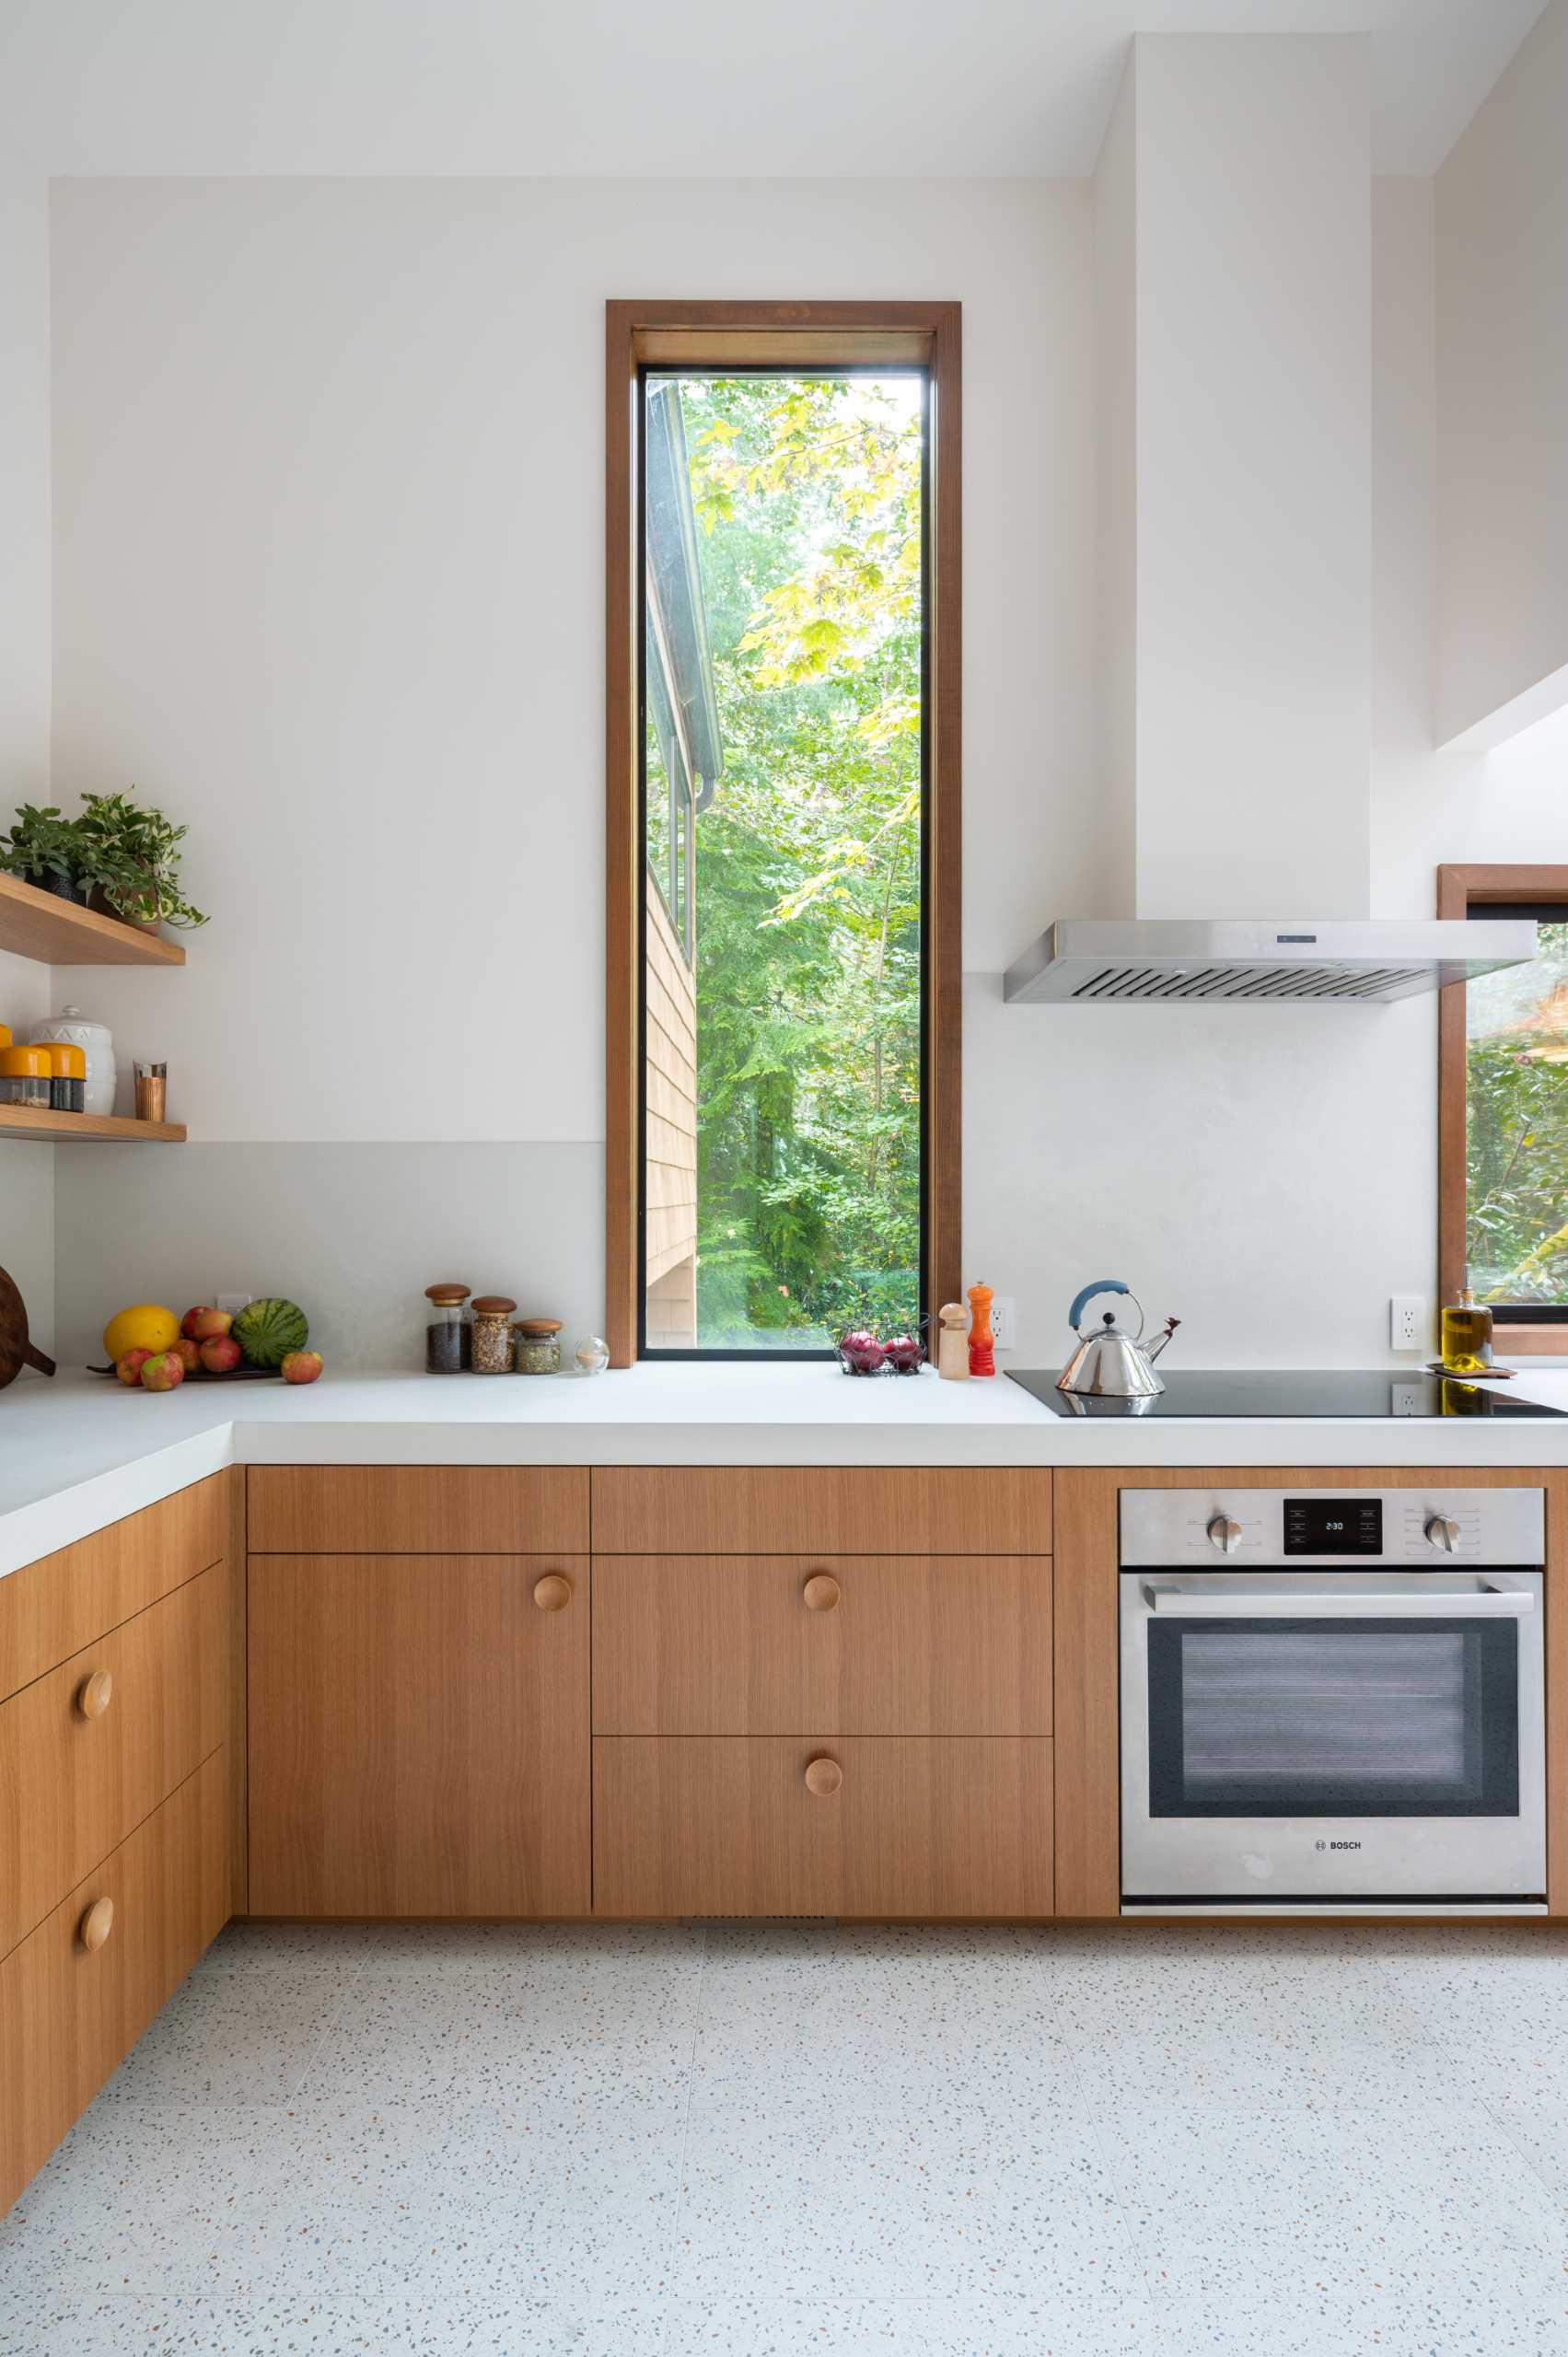 A remodeled kitchen with wood cabinets, thick countertops, and tall windows.